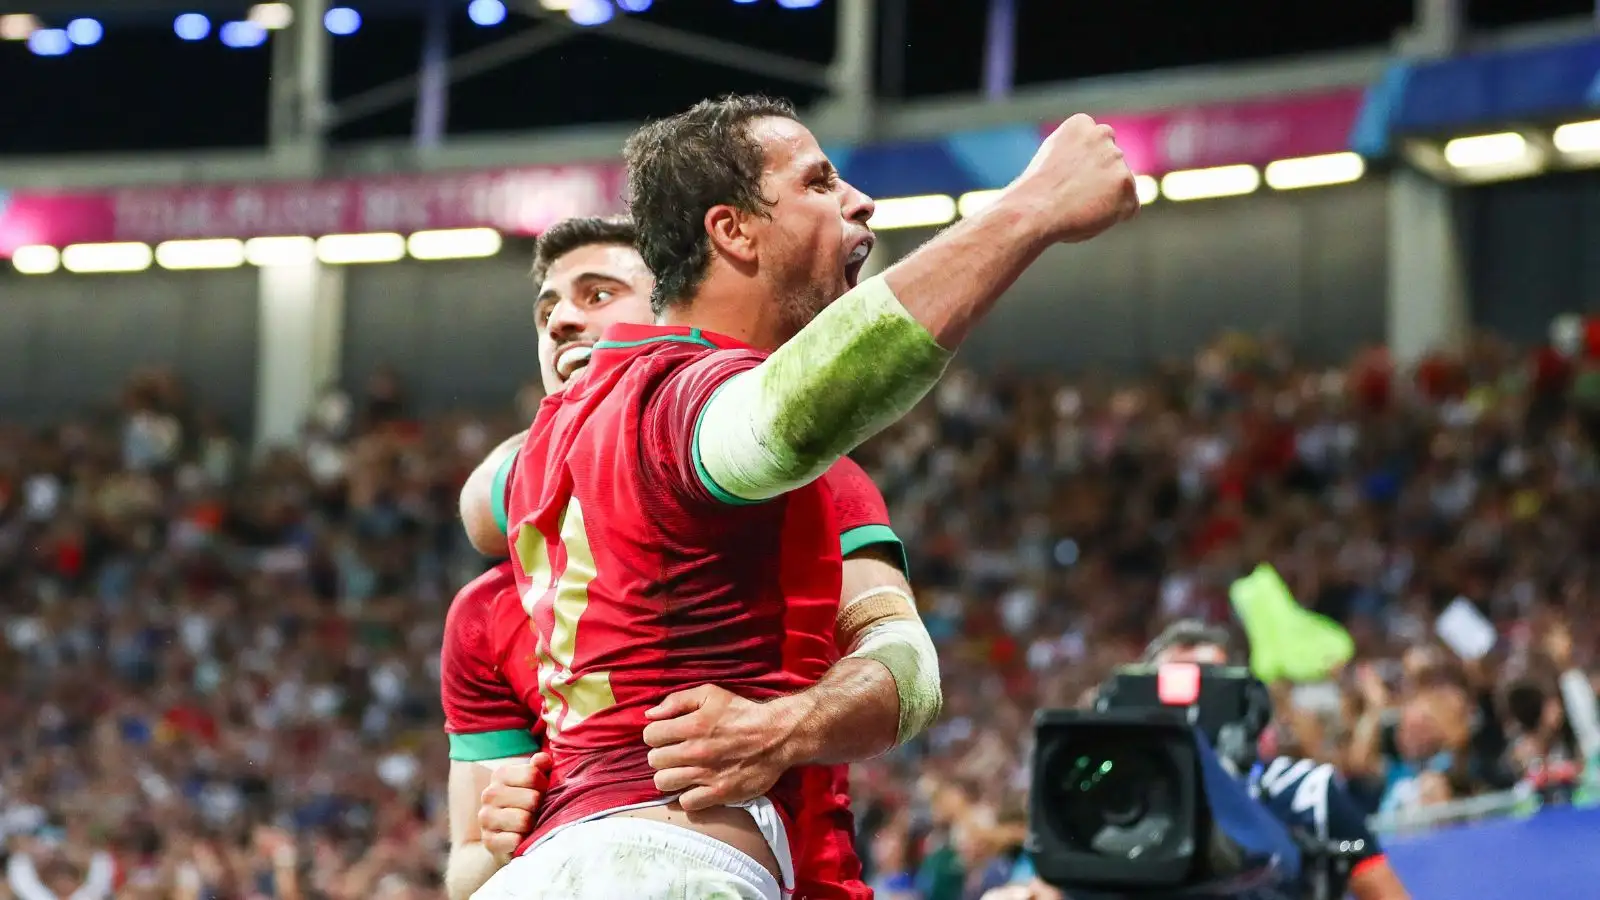 Raffaele Storti and Jose Lima of Portugal during the Rugby World Cup Pool C match between Fiji and Portugal